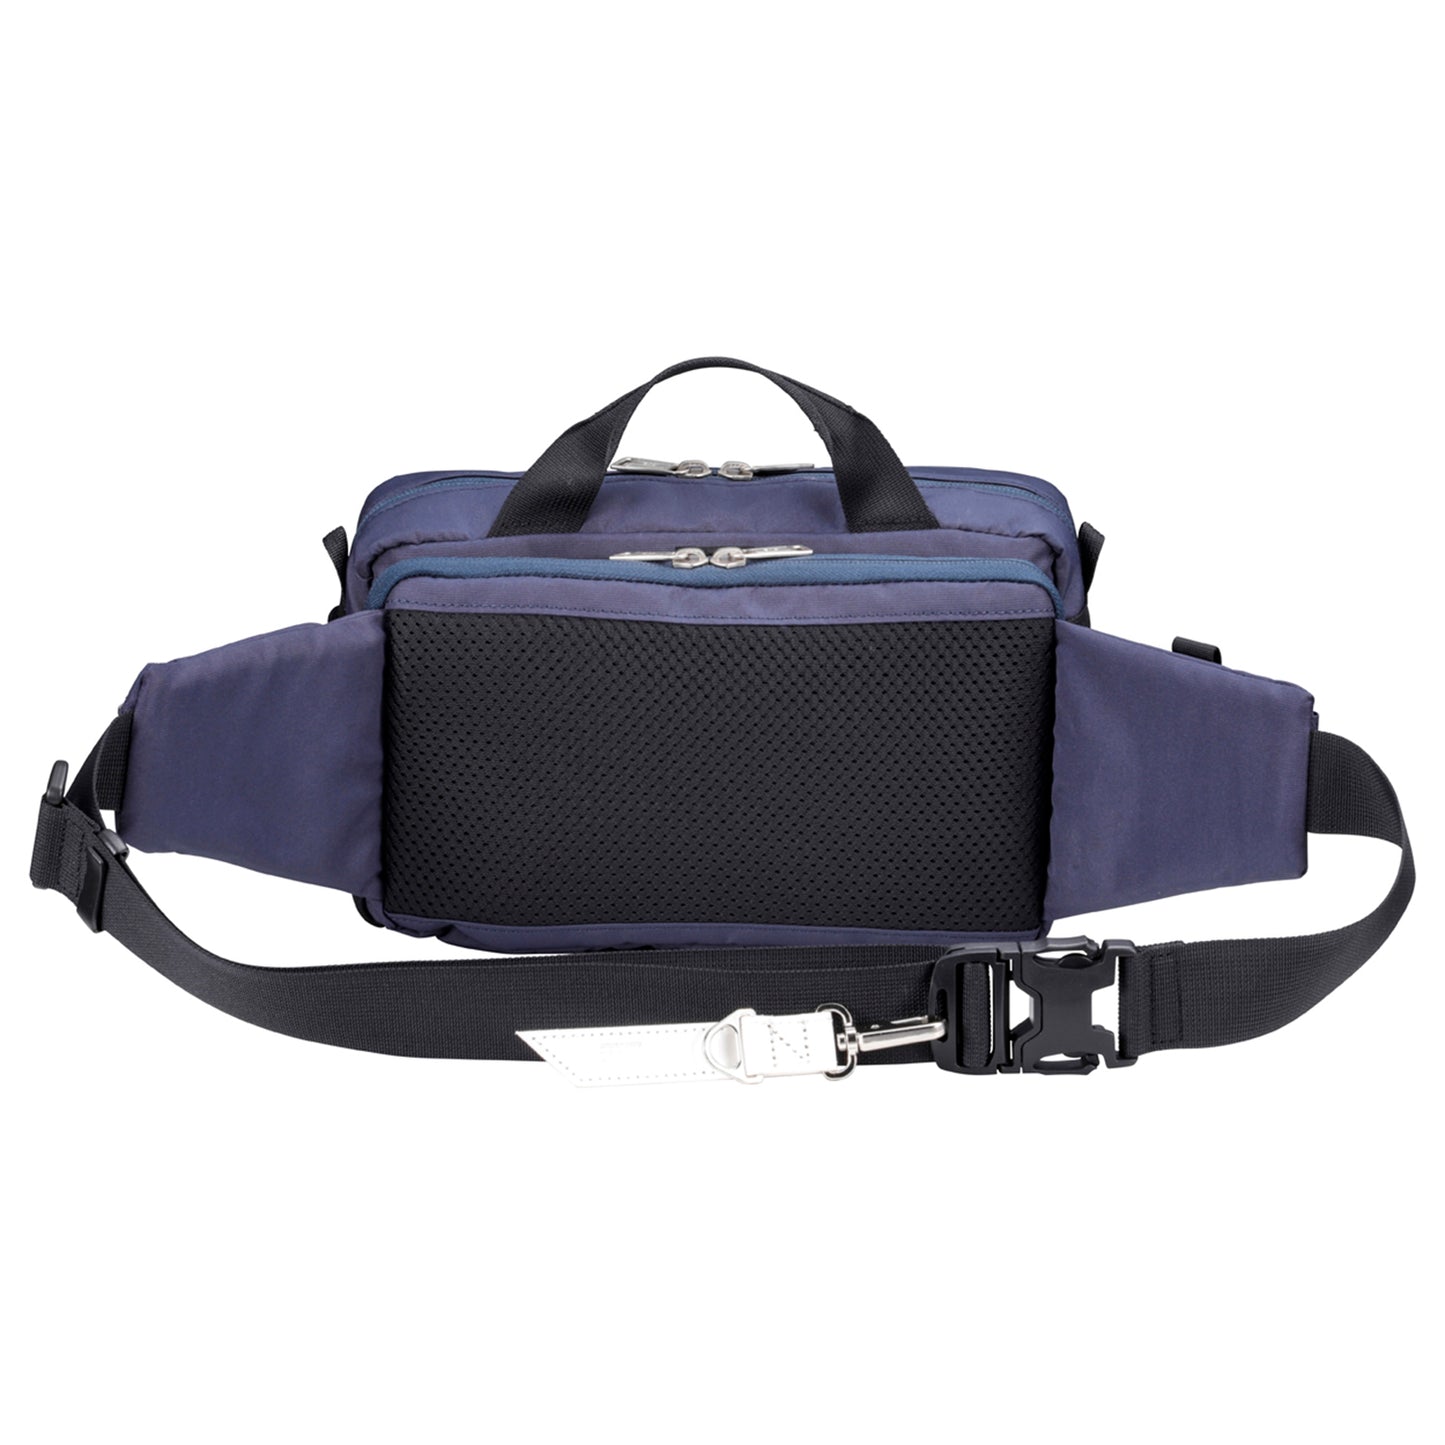 CIE WEATHER Waist Pack with MARKET BAG